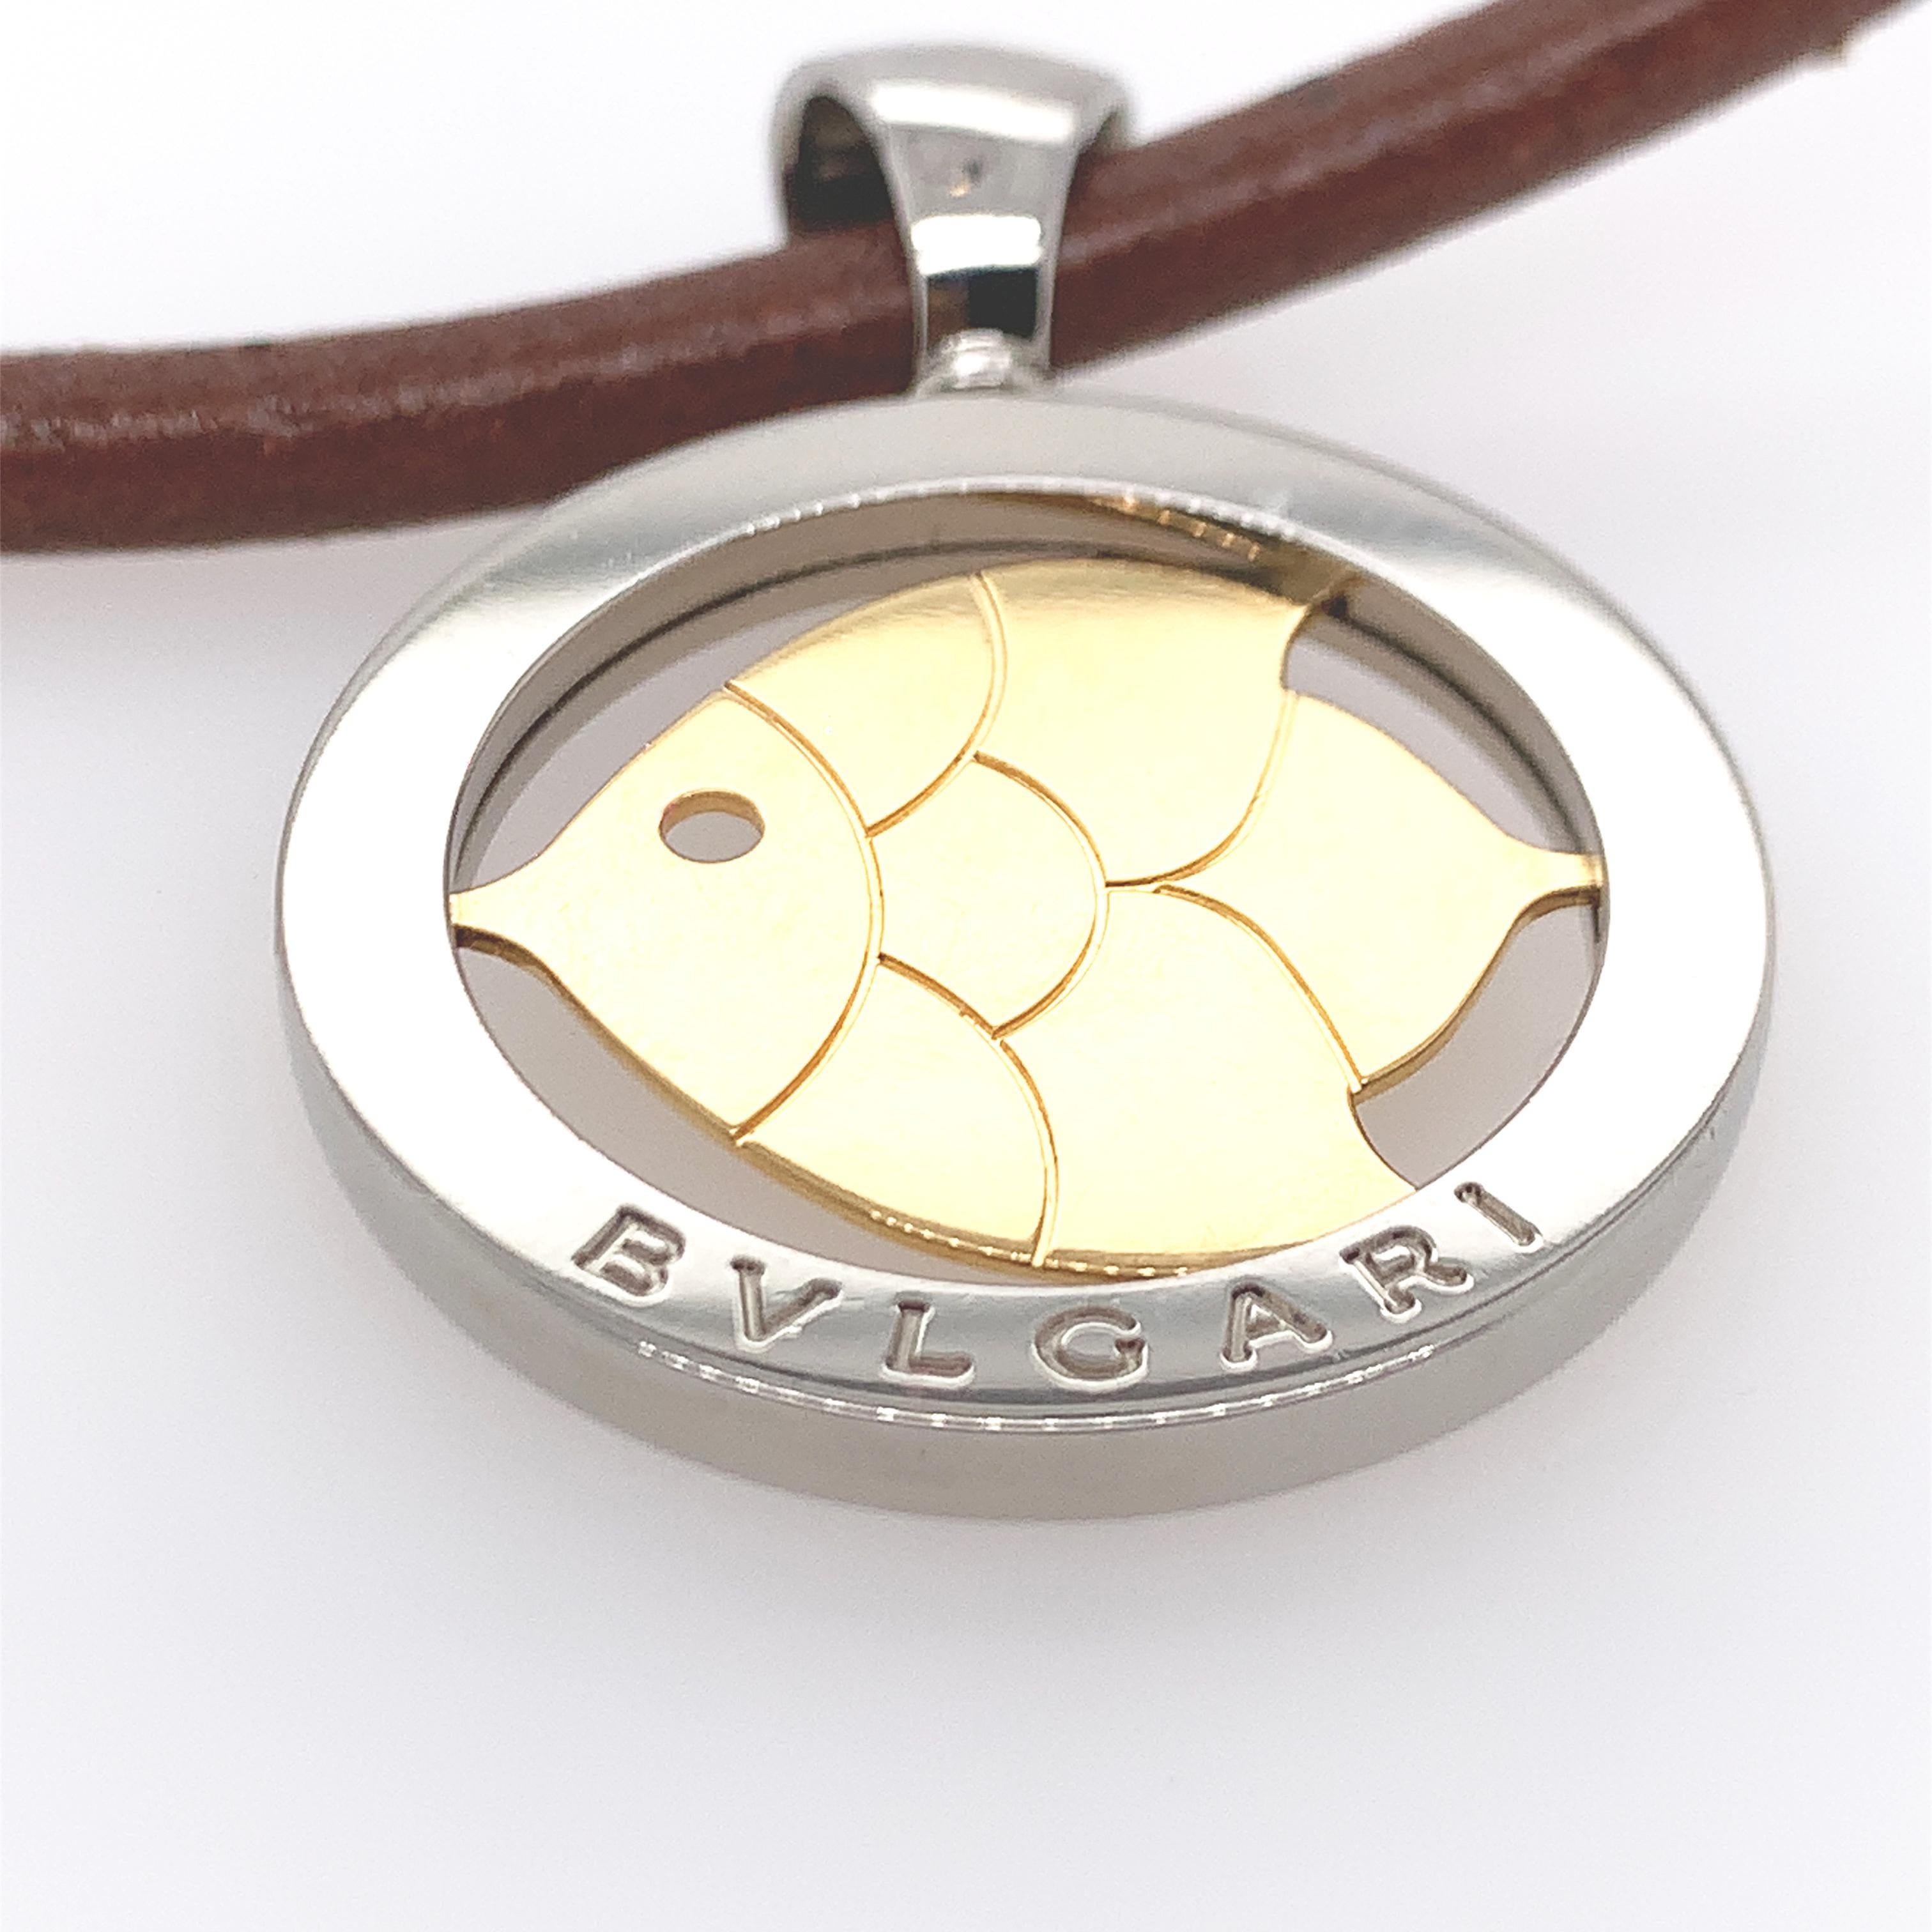 18K Y/gold and stainless steel leather necklace, stamps BVLGARI 750 Steel 2337 AL Made in Italy.